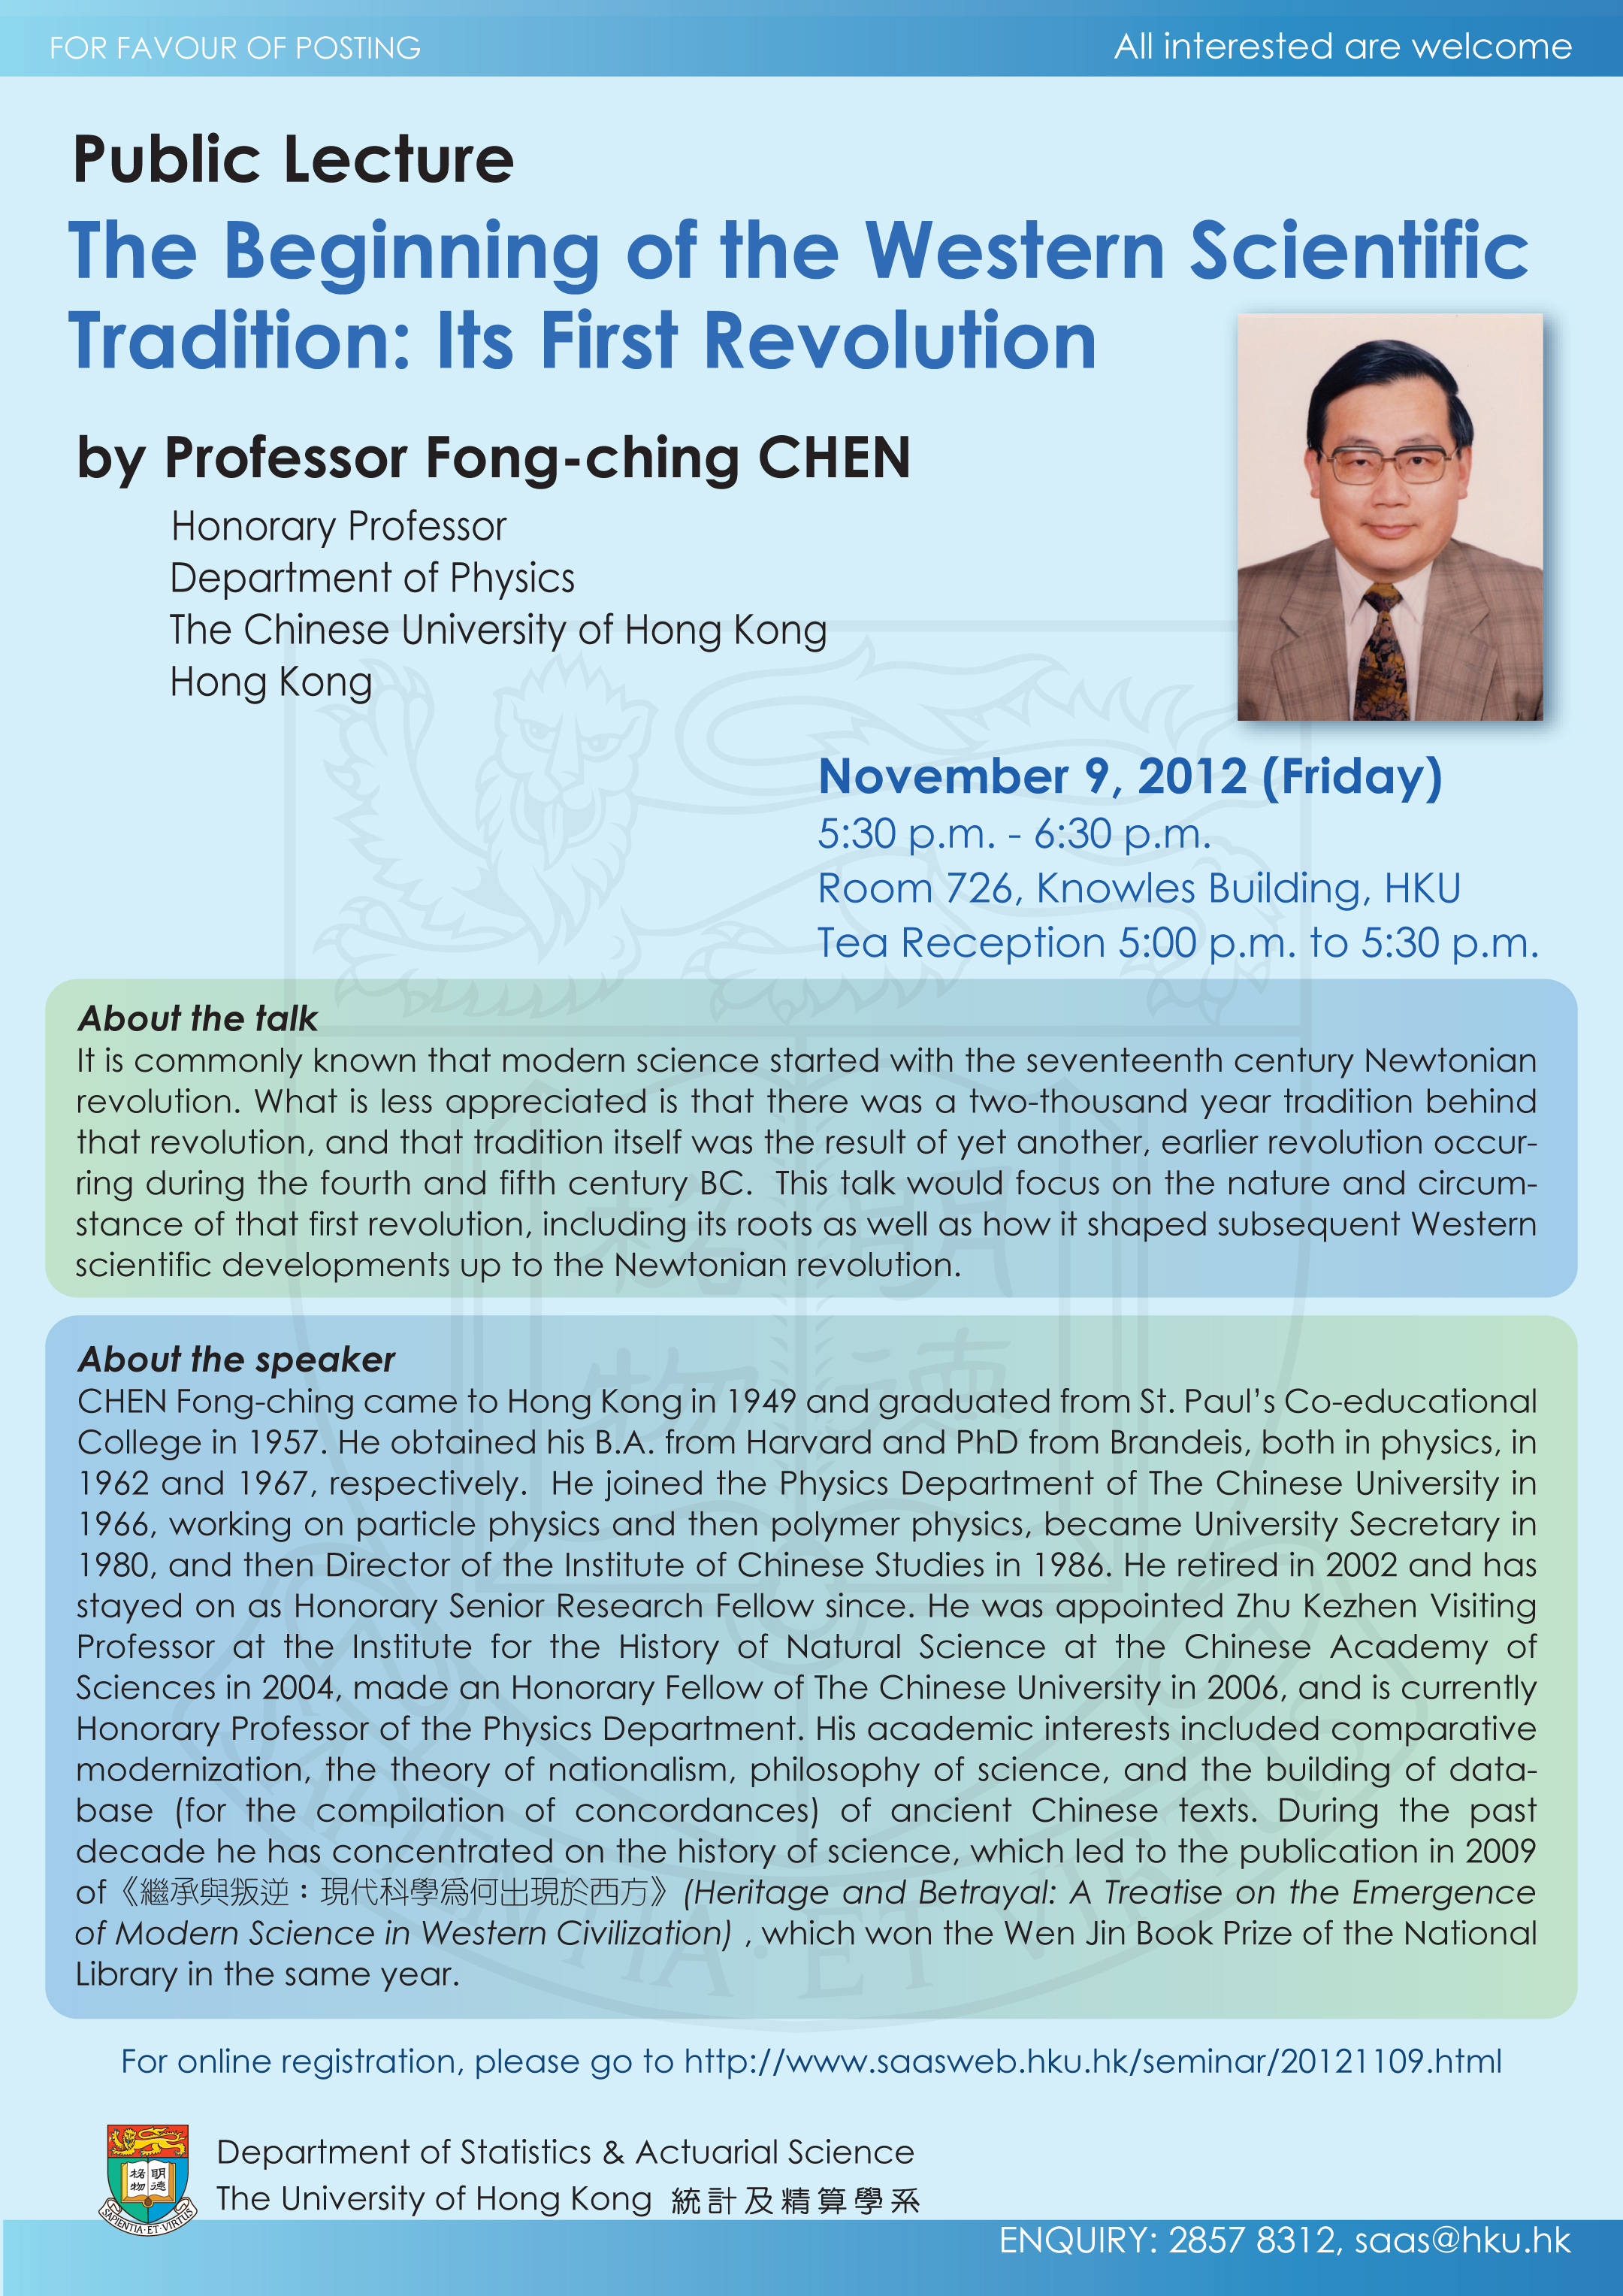 Public Lecture for 'The Beginning of the Western Scientific Tradition: Its First Revolution' by Professor Fong-ching CHEN